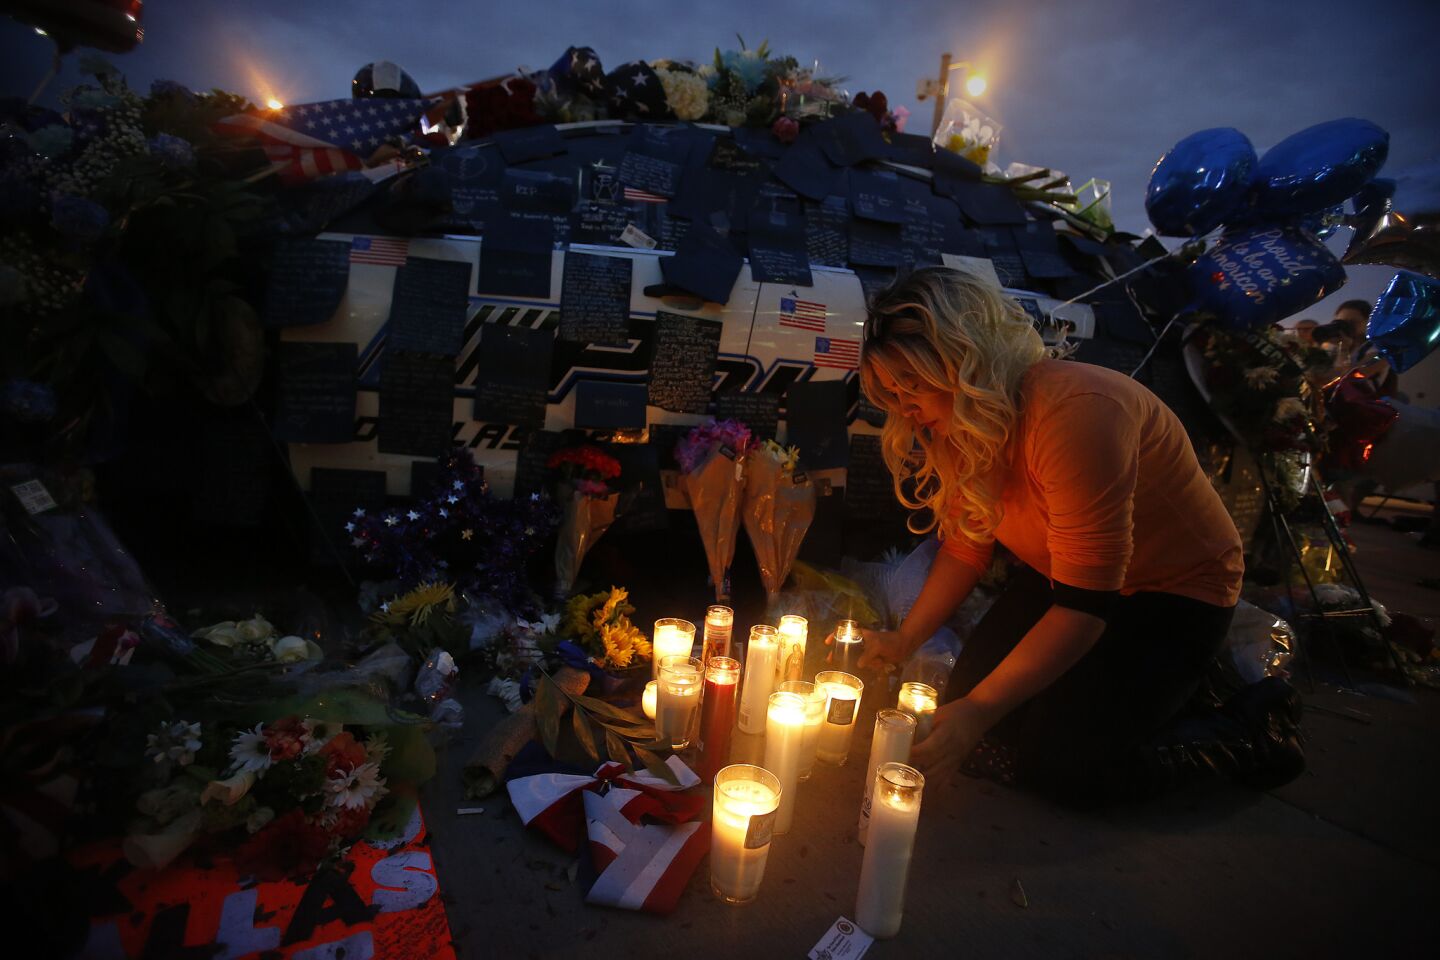 Tasha Lomoglio, of Dallas, pays her respects in front of a growing memorial at the Dallas police headquarters.